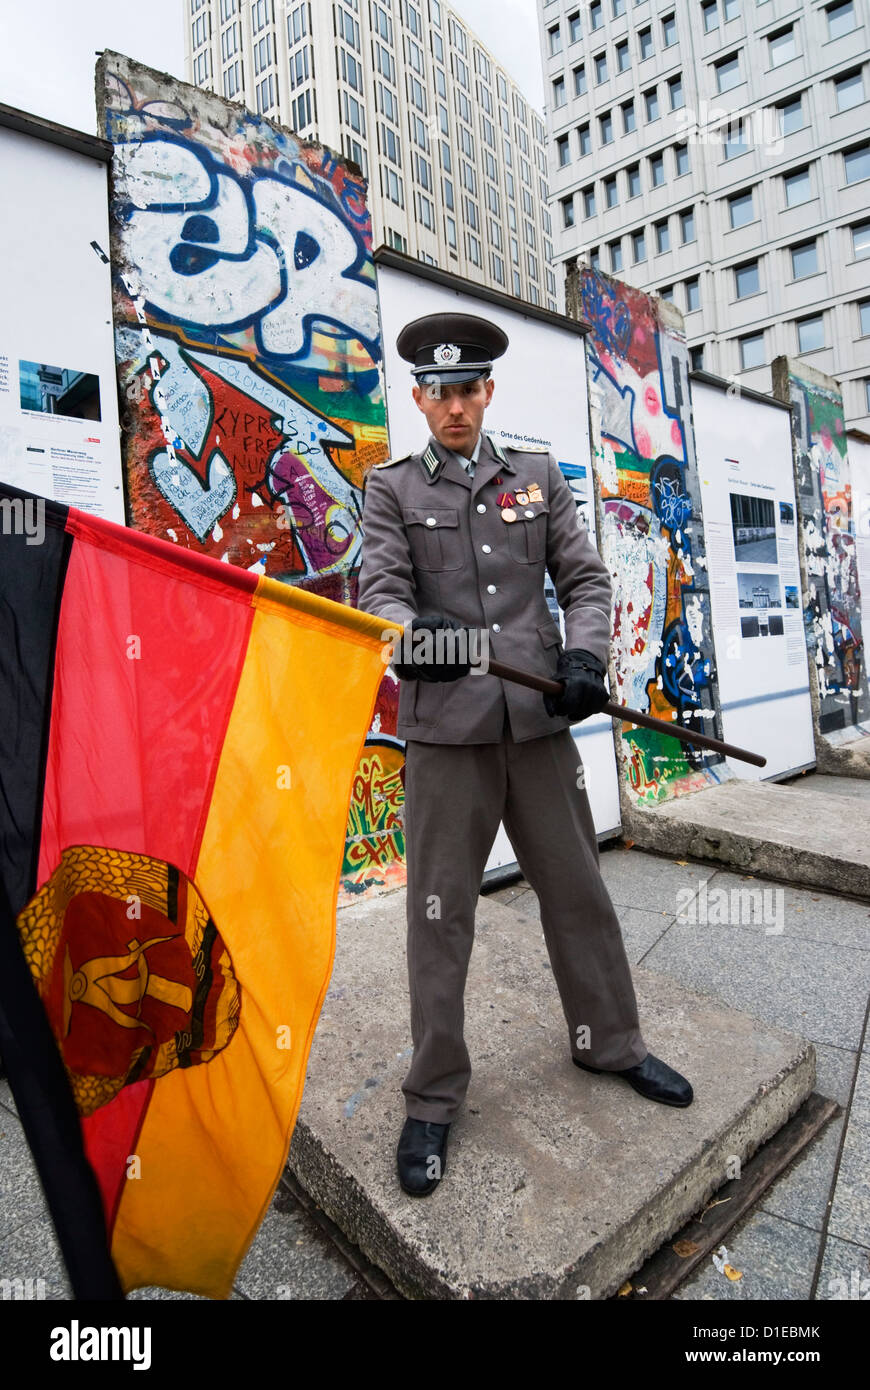 East German guard with former GDR flag in front of remains of the Berlin Wall, Potsdamer Platz, Berlin, Germany, Europe Stock Photo